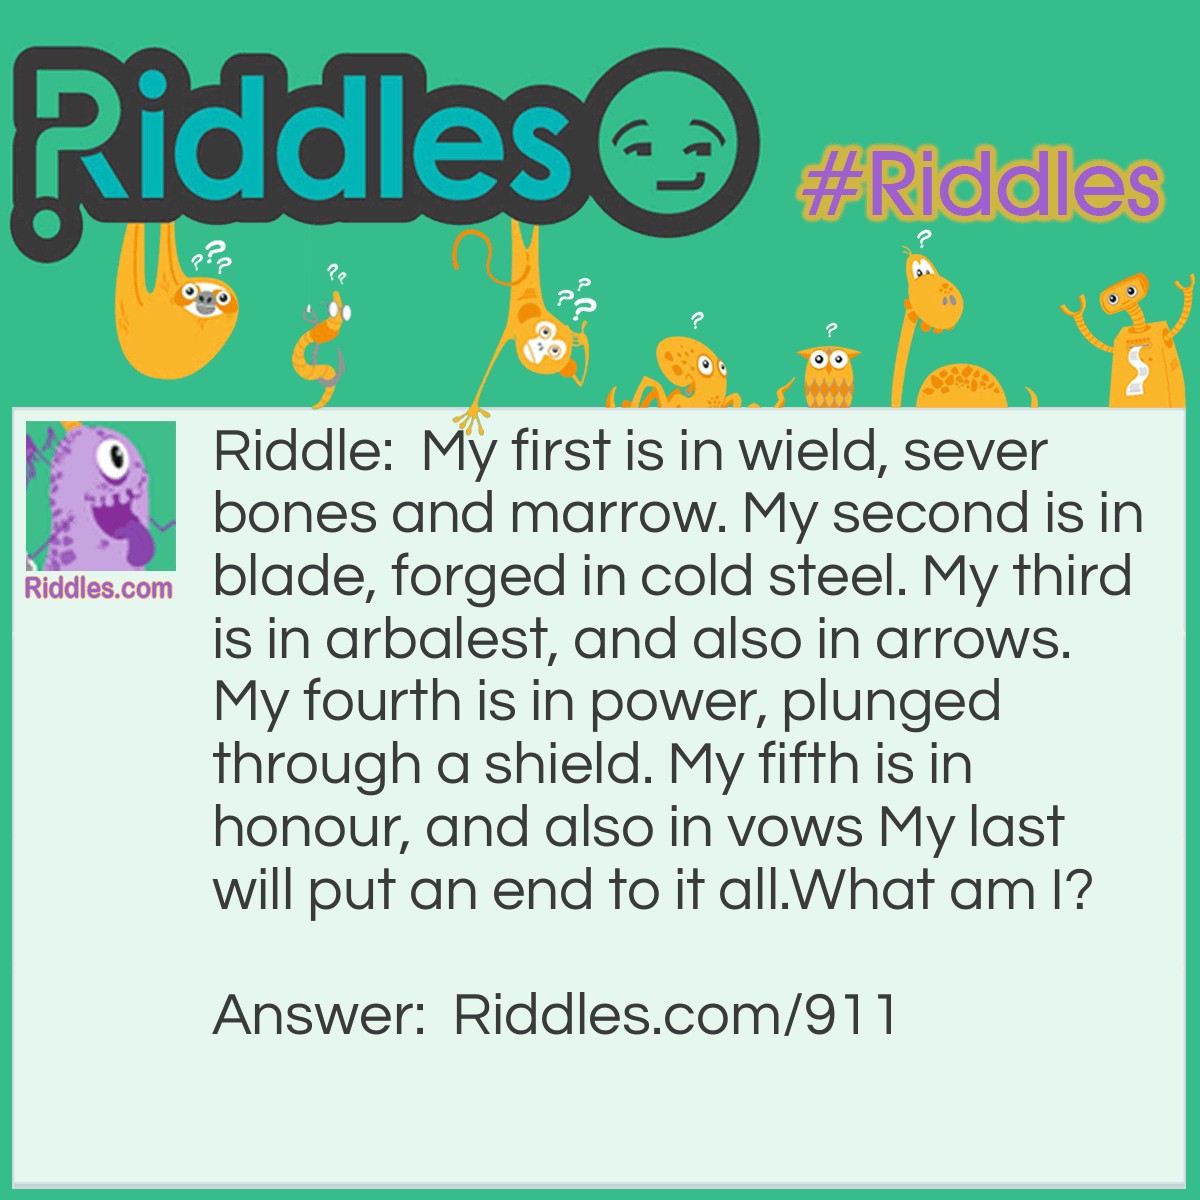 Riddle: My first is in wield, sever bones and marrow. My second is in blade, forged in cold steel. My third is in arbalest, and also in arrows. My fourth is in power, plunged through a shield. My fifth is in honour, and also in vows My last will put an end to it all.
What am I? Answer: A weapon!